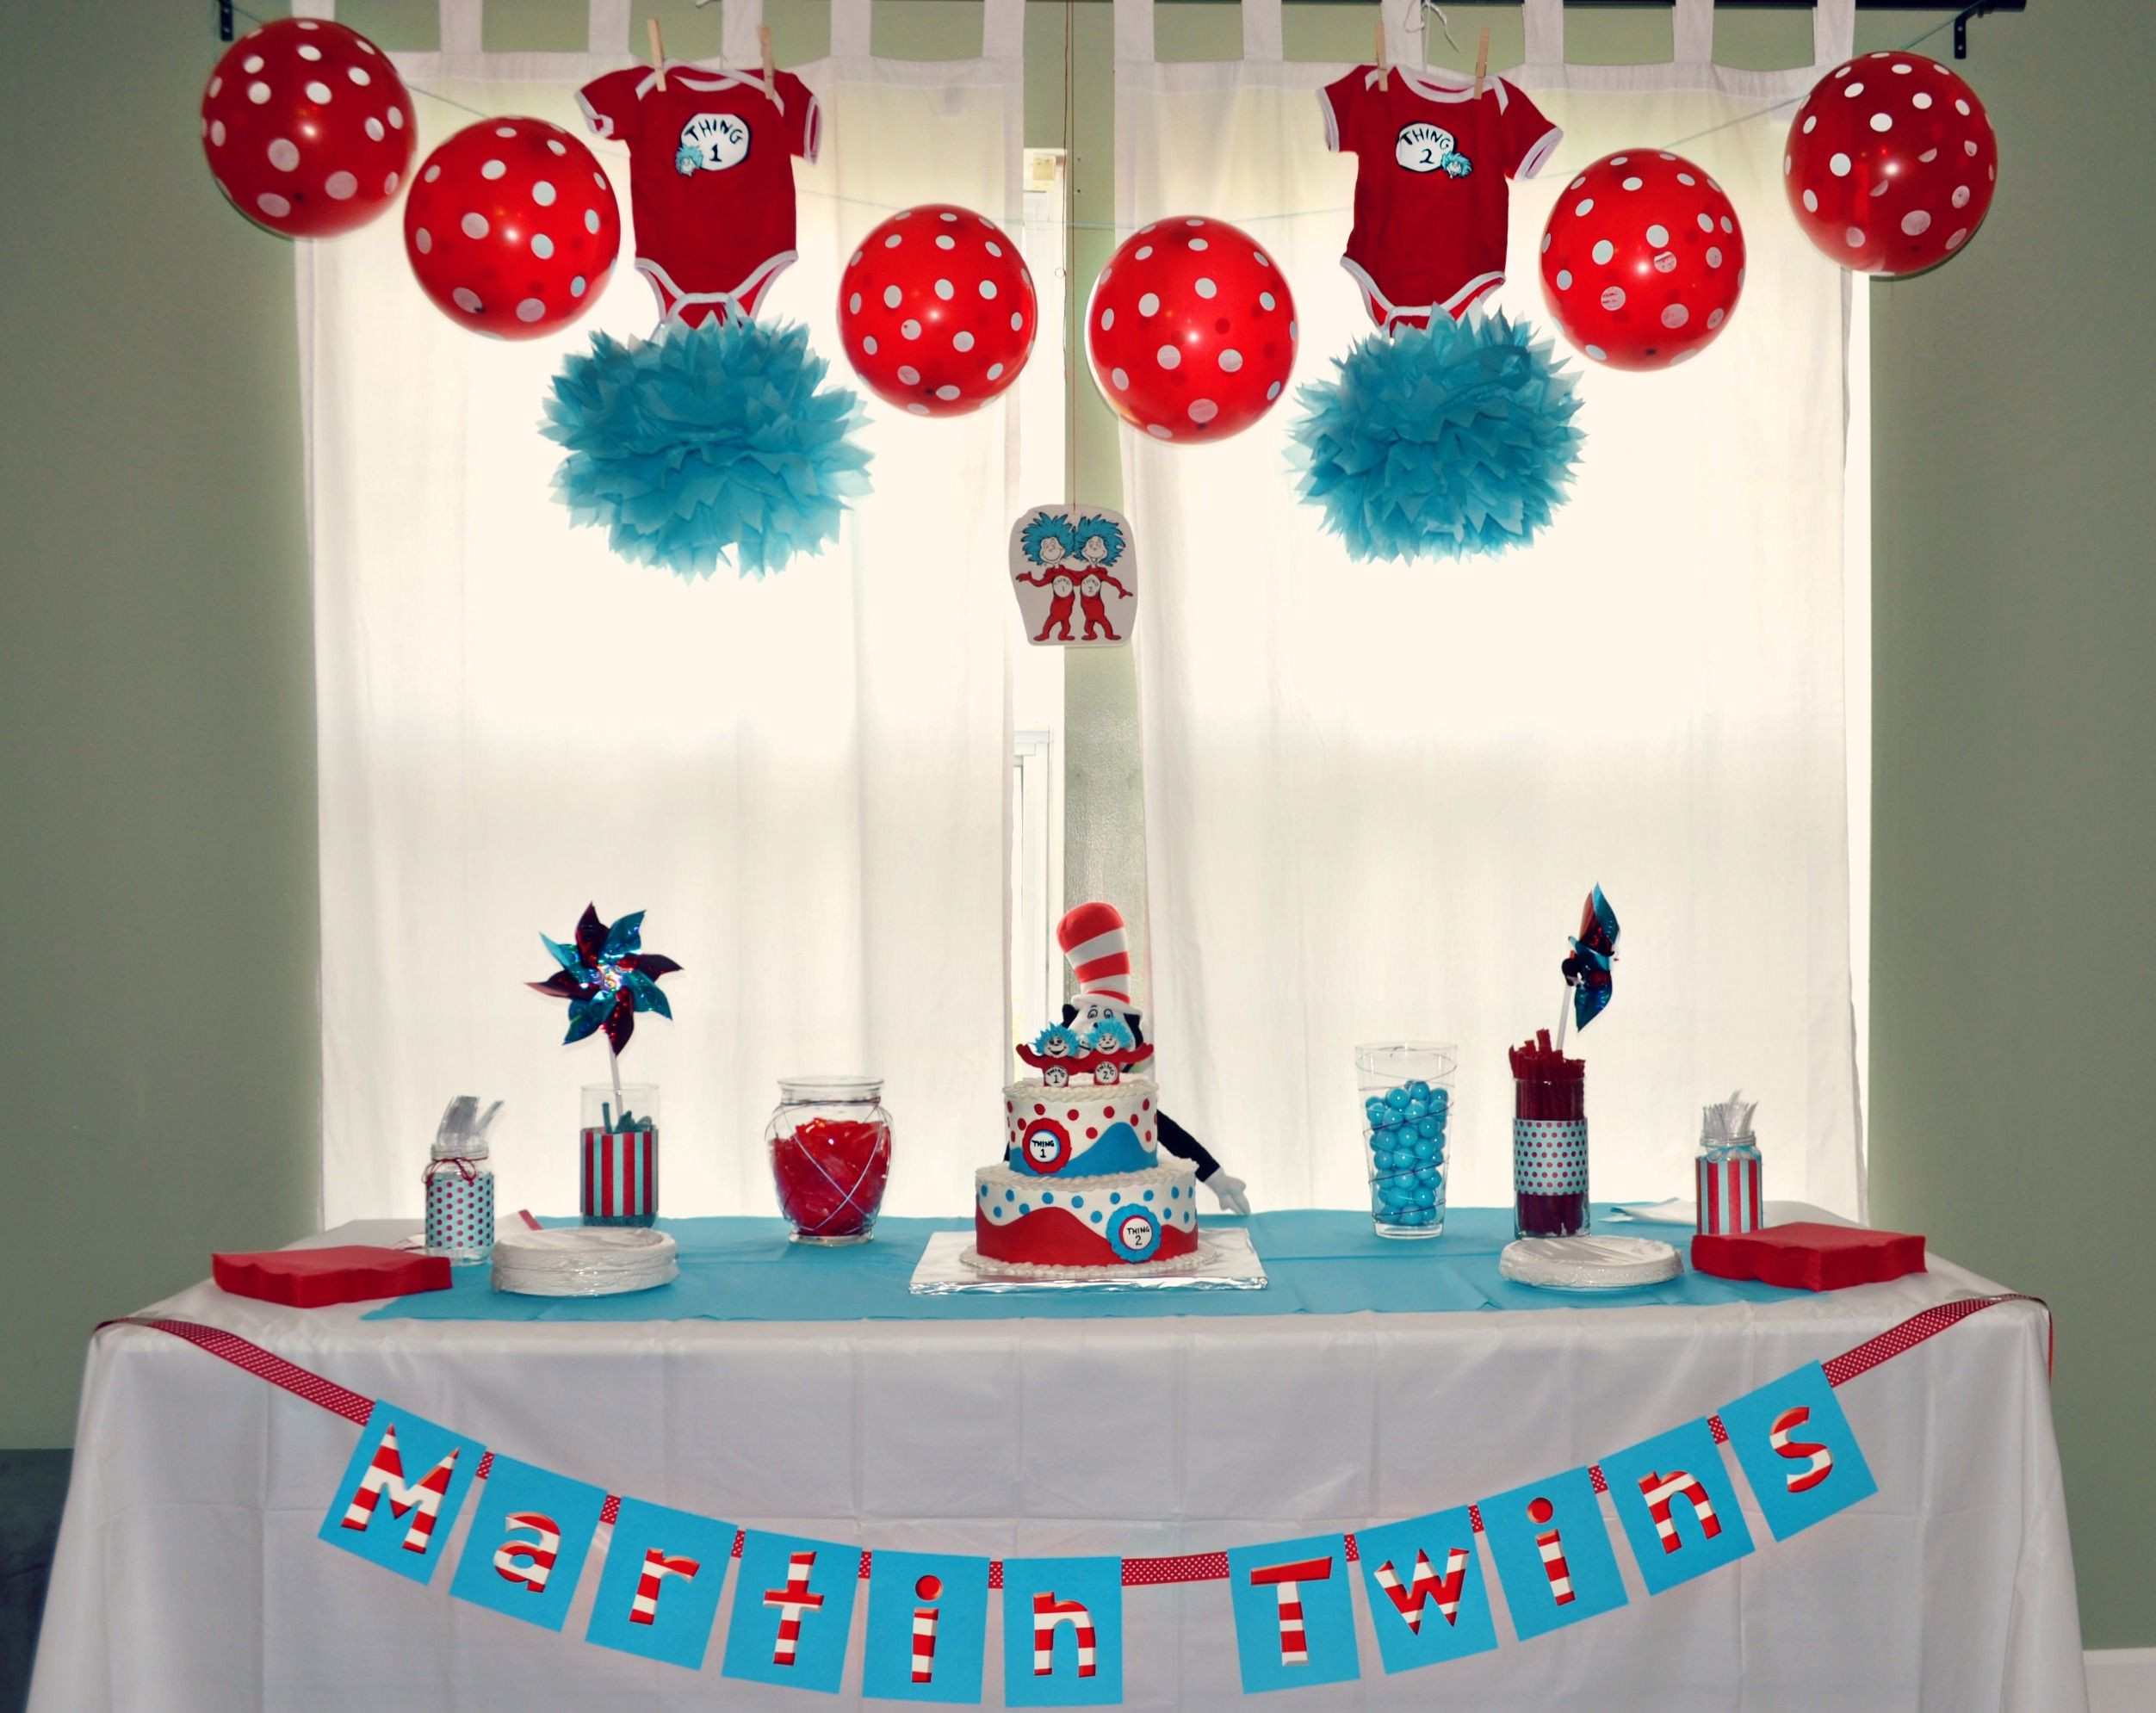 Gender Reveal Party Ideas Twins
 LOVE THIS IF WE HAVE TWINS "The Martin Twins Gender